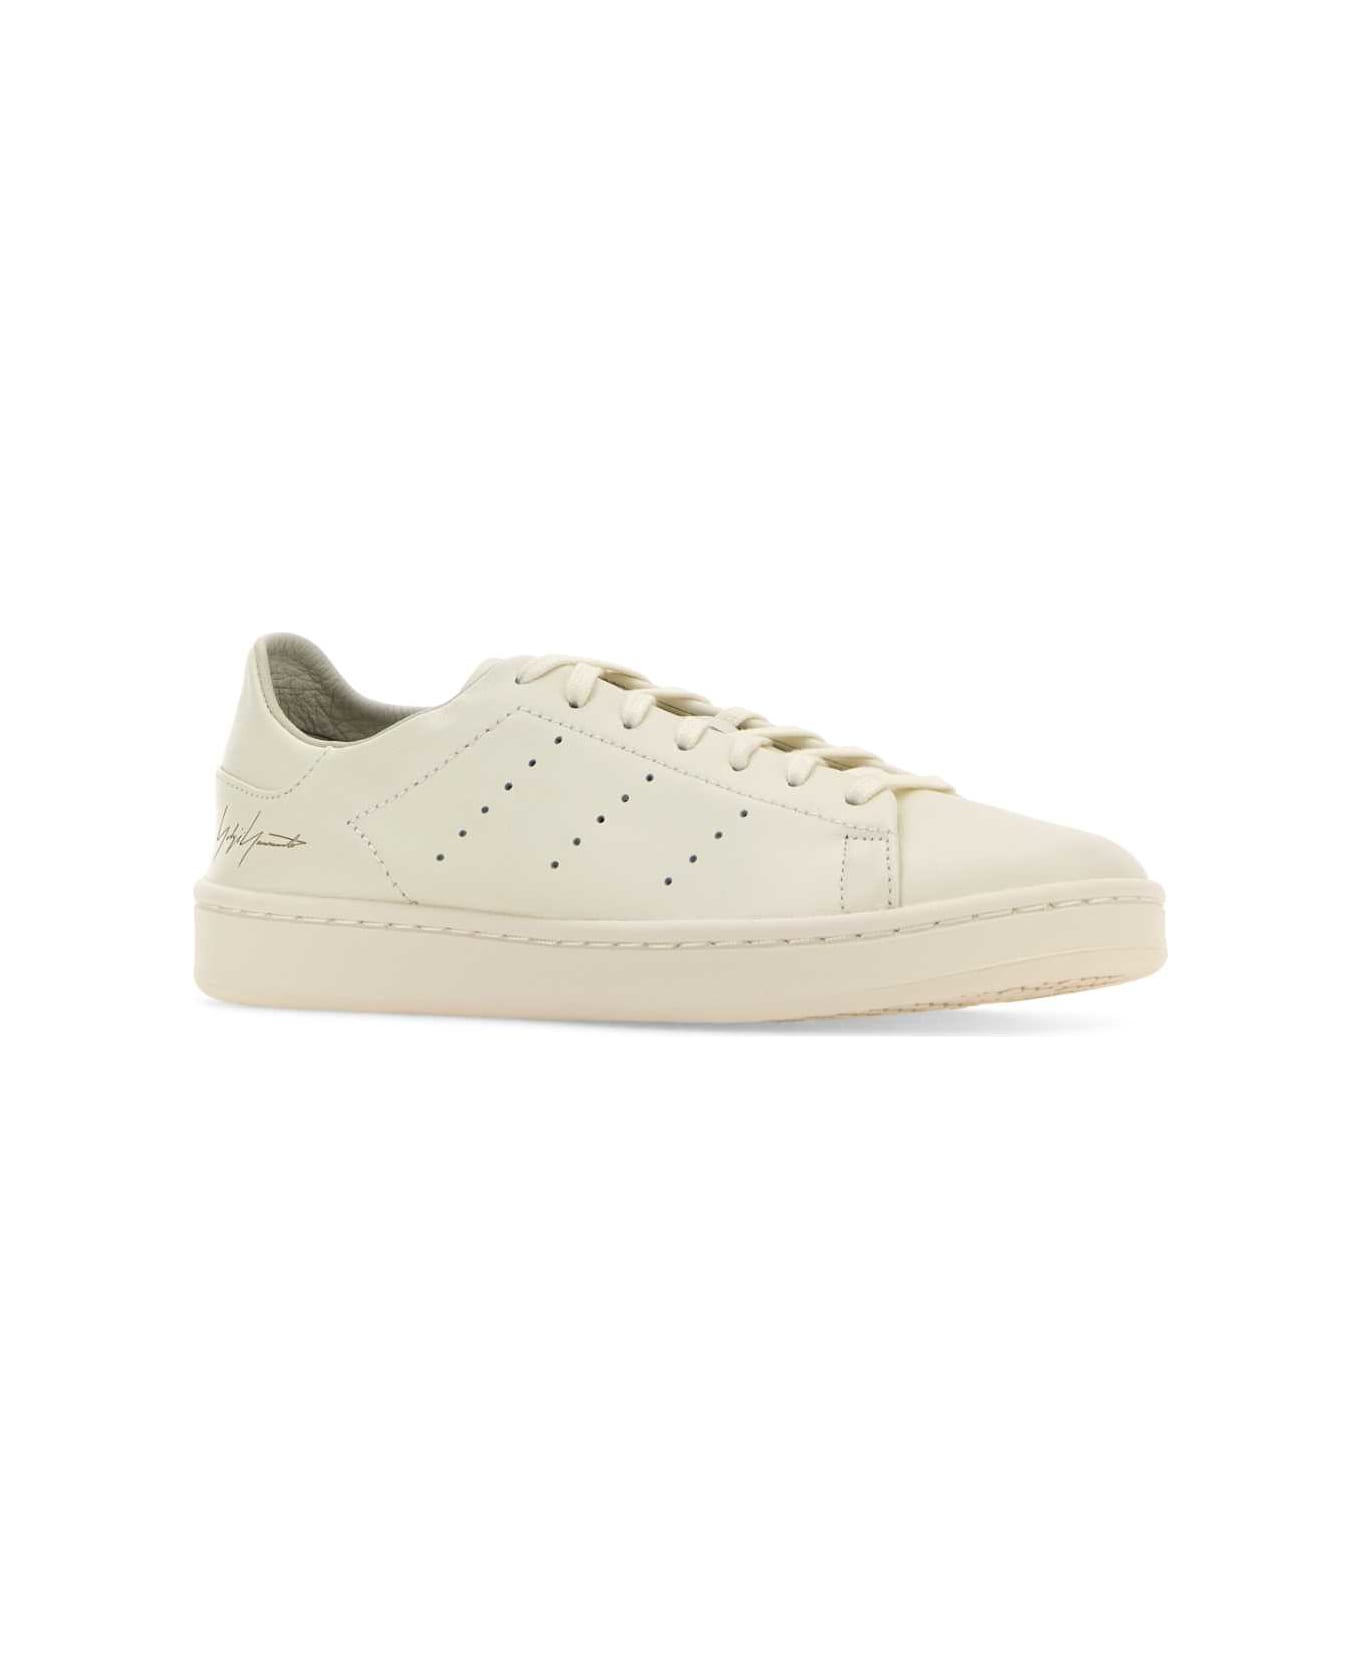 Y-3 White Leather Y-3 Stan Smith Sneakers - OFFWHITEOFFWHITEOFFWHITE スニーカー